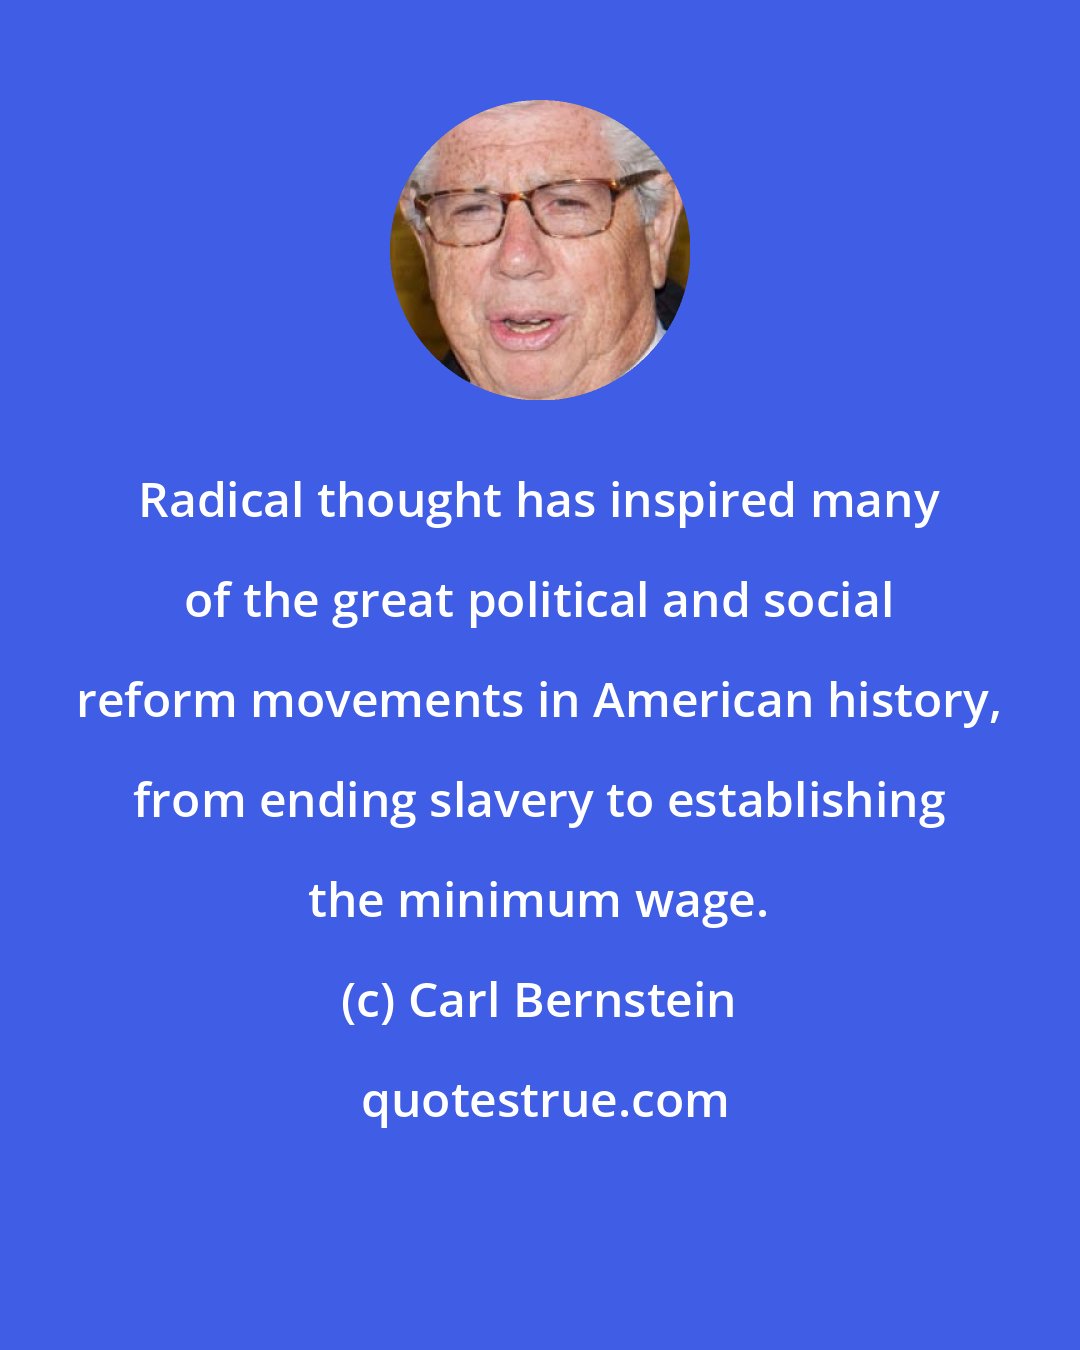 Carl Bernstein: Radical thought has inspired many of the great political and social reform movements in American history, from ending slavery to establishing the minimum wage.